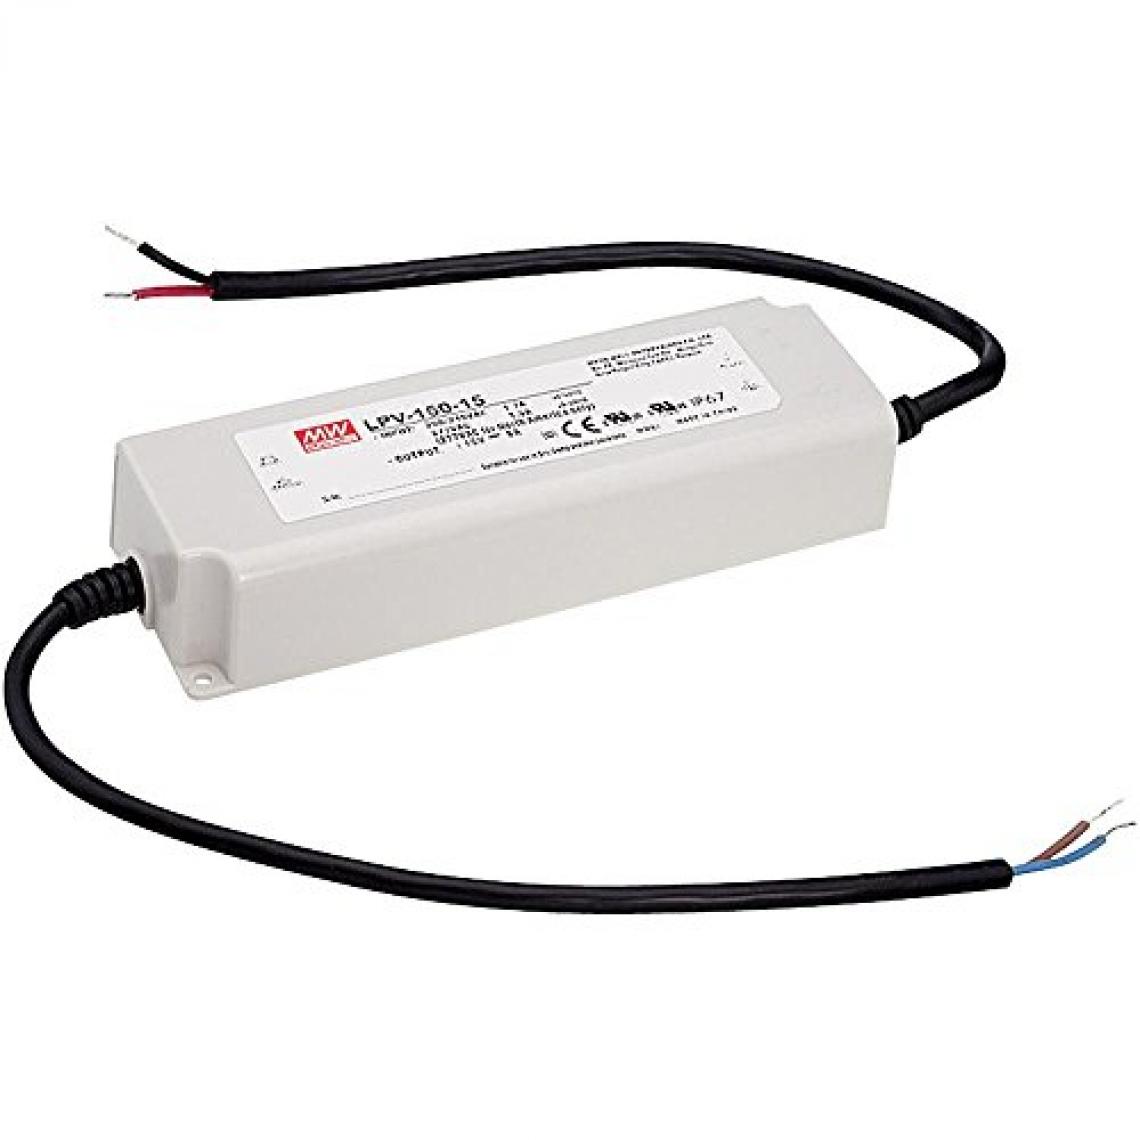 Inconnu - Driver LED Mean Well LPV-150-24 151 W 24 V 6,3 A tension constante - Convertisseurs